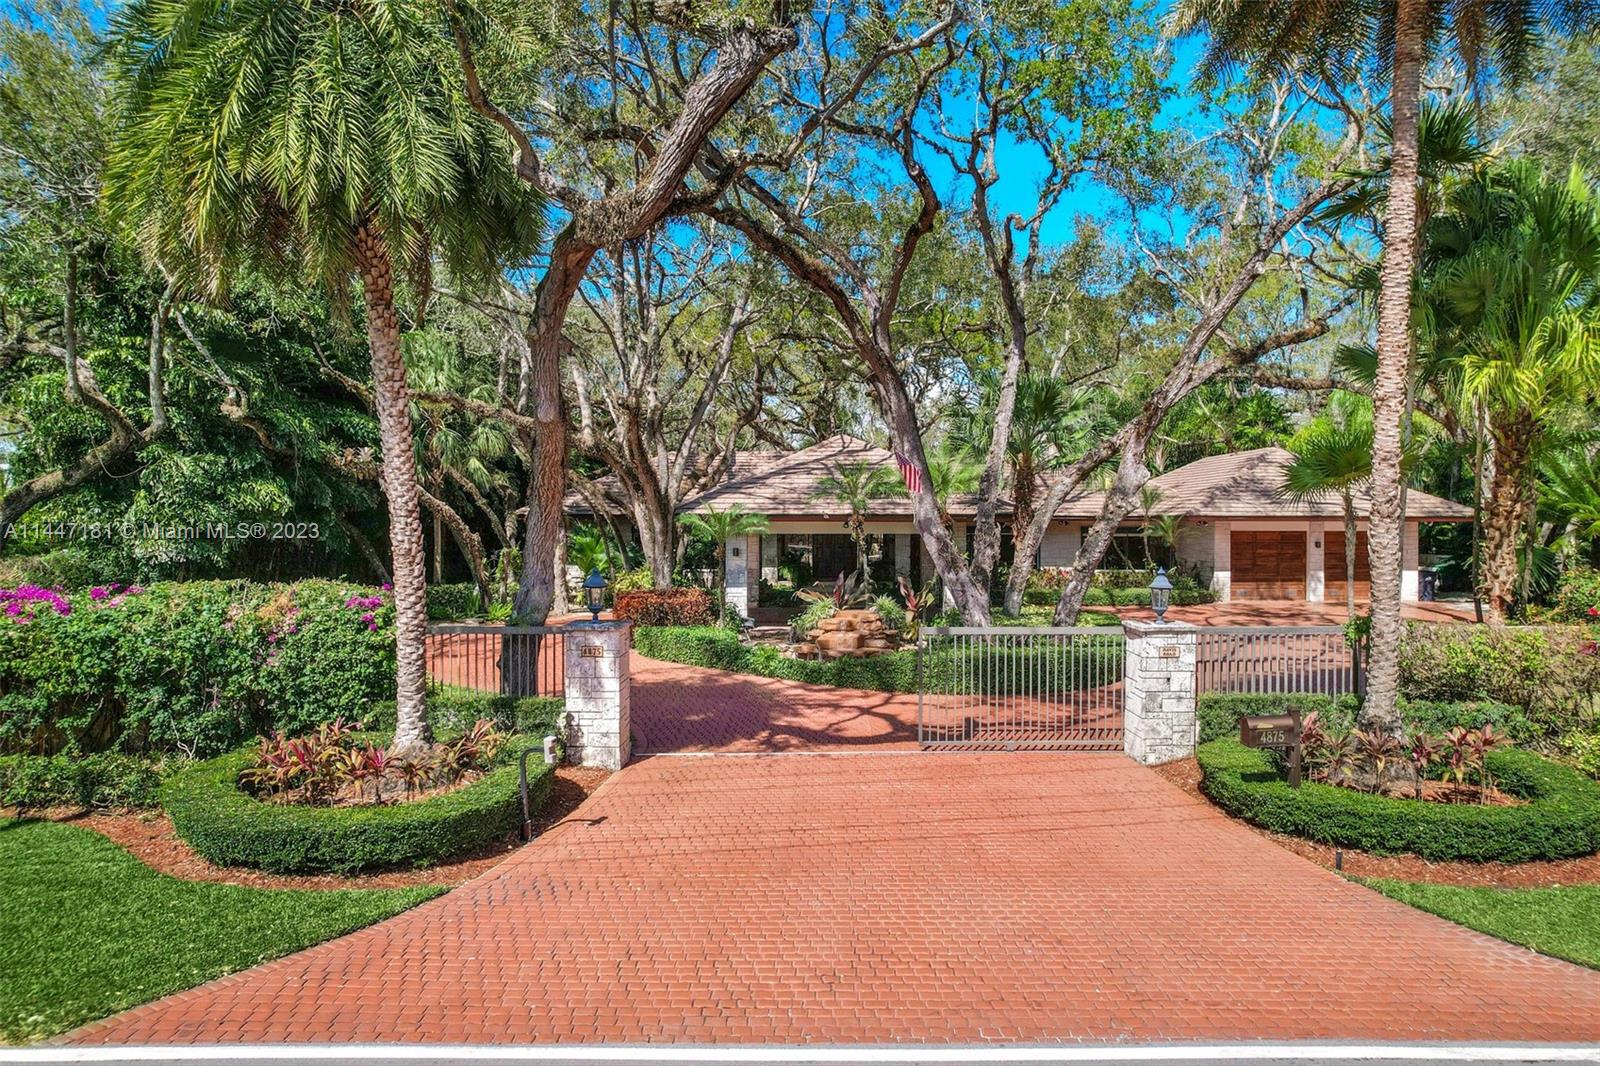 Located in the heart of the sought-after Ponce Davis neighborhood, this amazing one-story Florida home sits on 1 acre of land surrounded by lush landscaping and majestic live oak trees with tons of privacy. This magnificent and spacious residence offers warmth, style, elegance, and comfort with a great floor plan and beautiful vaulted mahogany ceilings throughout. The home provides a defined formal living, dining, kitchen, and family room that overlooks a gorgeous oversized pool, cabana with bathroom, patio area, and tennis court. Additionally, five spacious bedrooms with en-suites, powder room, 2 car garage and gated entrance make this home a true gem. From the moment you enter, there is a seamless flow from the exterior to the interior with a vibrant and one-of-a-kind energy.